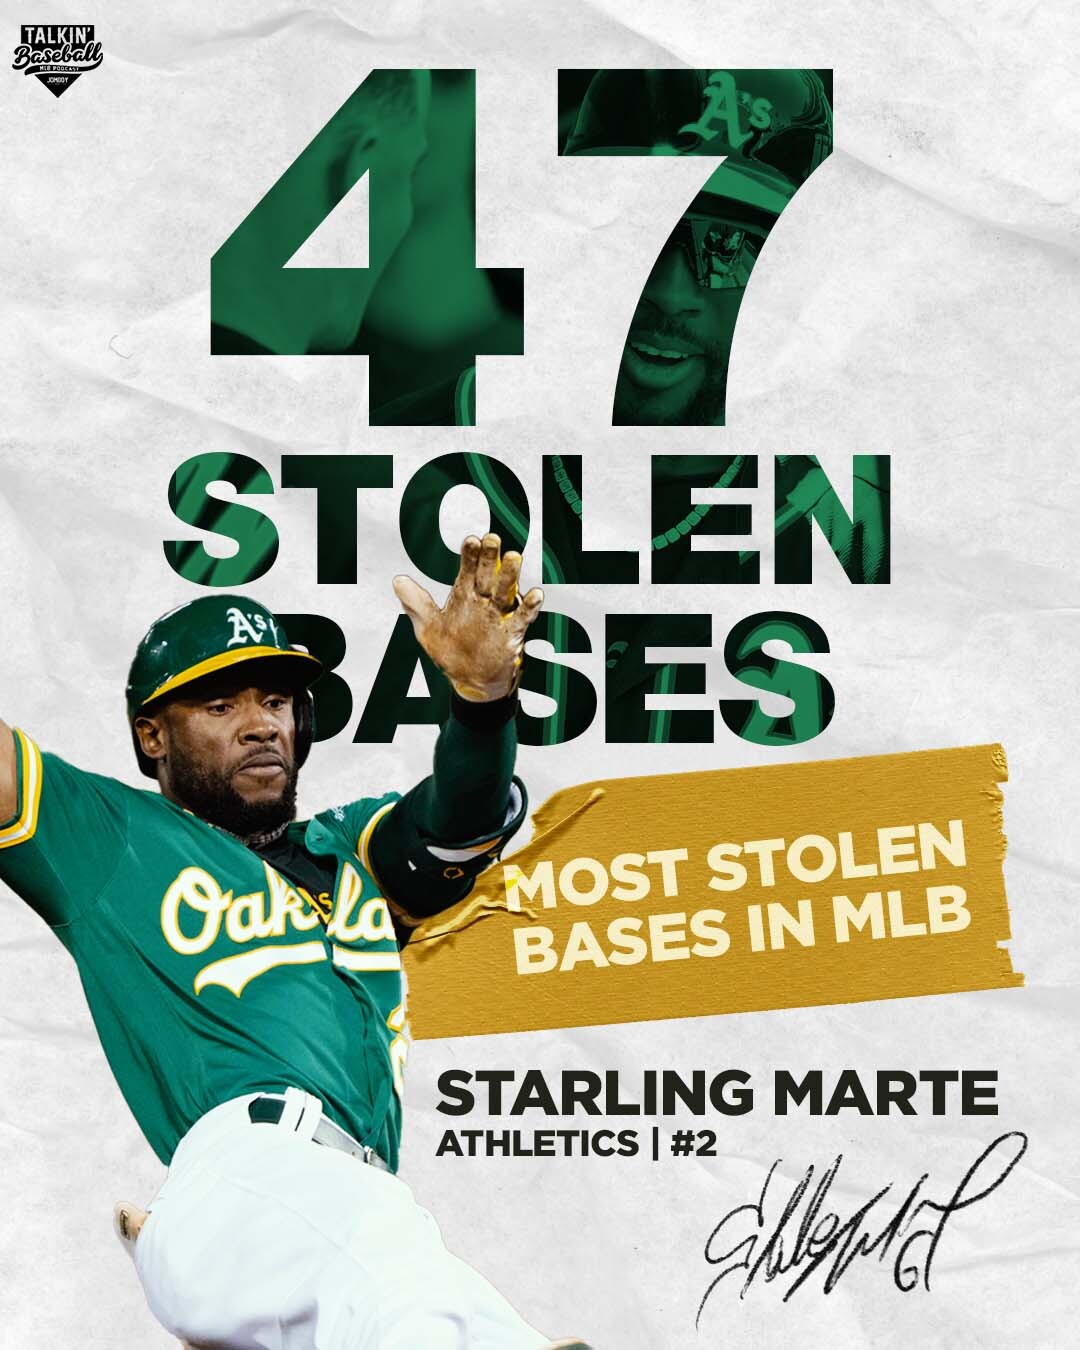 Talkin' Baseball on Twitter: Starling Marte is underrated at this point   / Twitter